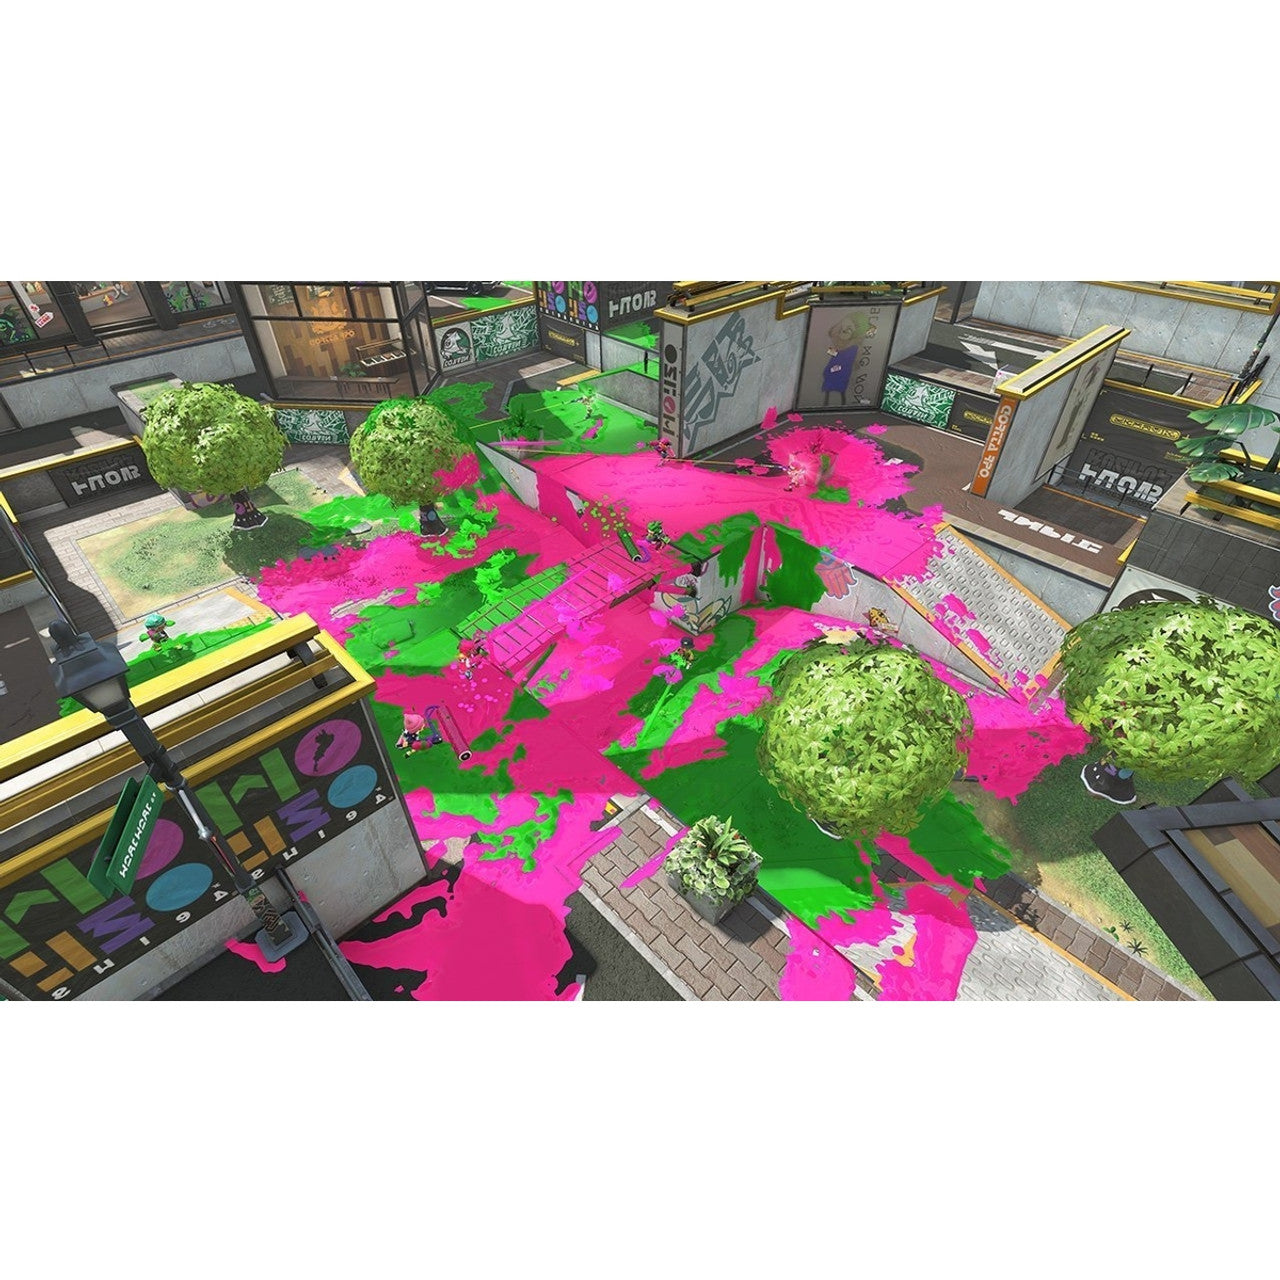 Product Image : This is brand new.<br>The squid kids called Inklings are back to splat more ink and claim more turf in this colorful and chaotic 4-on-4 action shooter. For the first time, take Turf War battles on-the-go with the Nintendo Switch system, and use any of the consoles portable play styles for intense local multiplayer1 action. Even team up for new 4-player co-op fun in Salmon Run!

Two years have passed since the original Splatoon game was released, and two years have also passed in Inkopolis! 